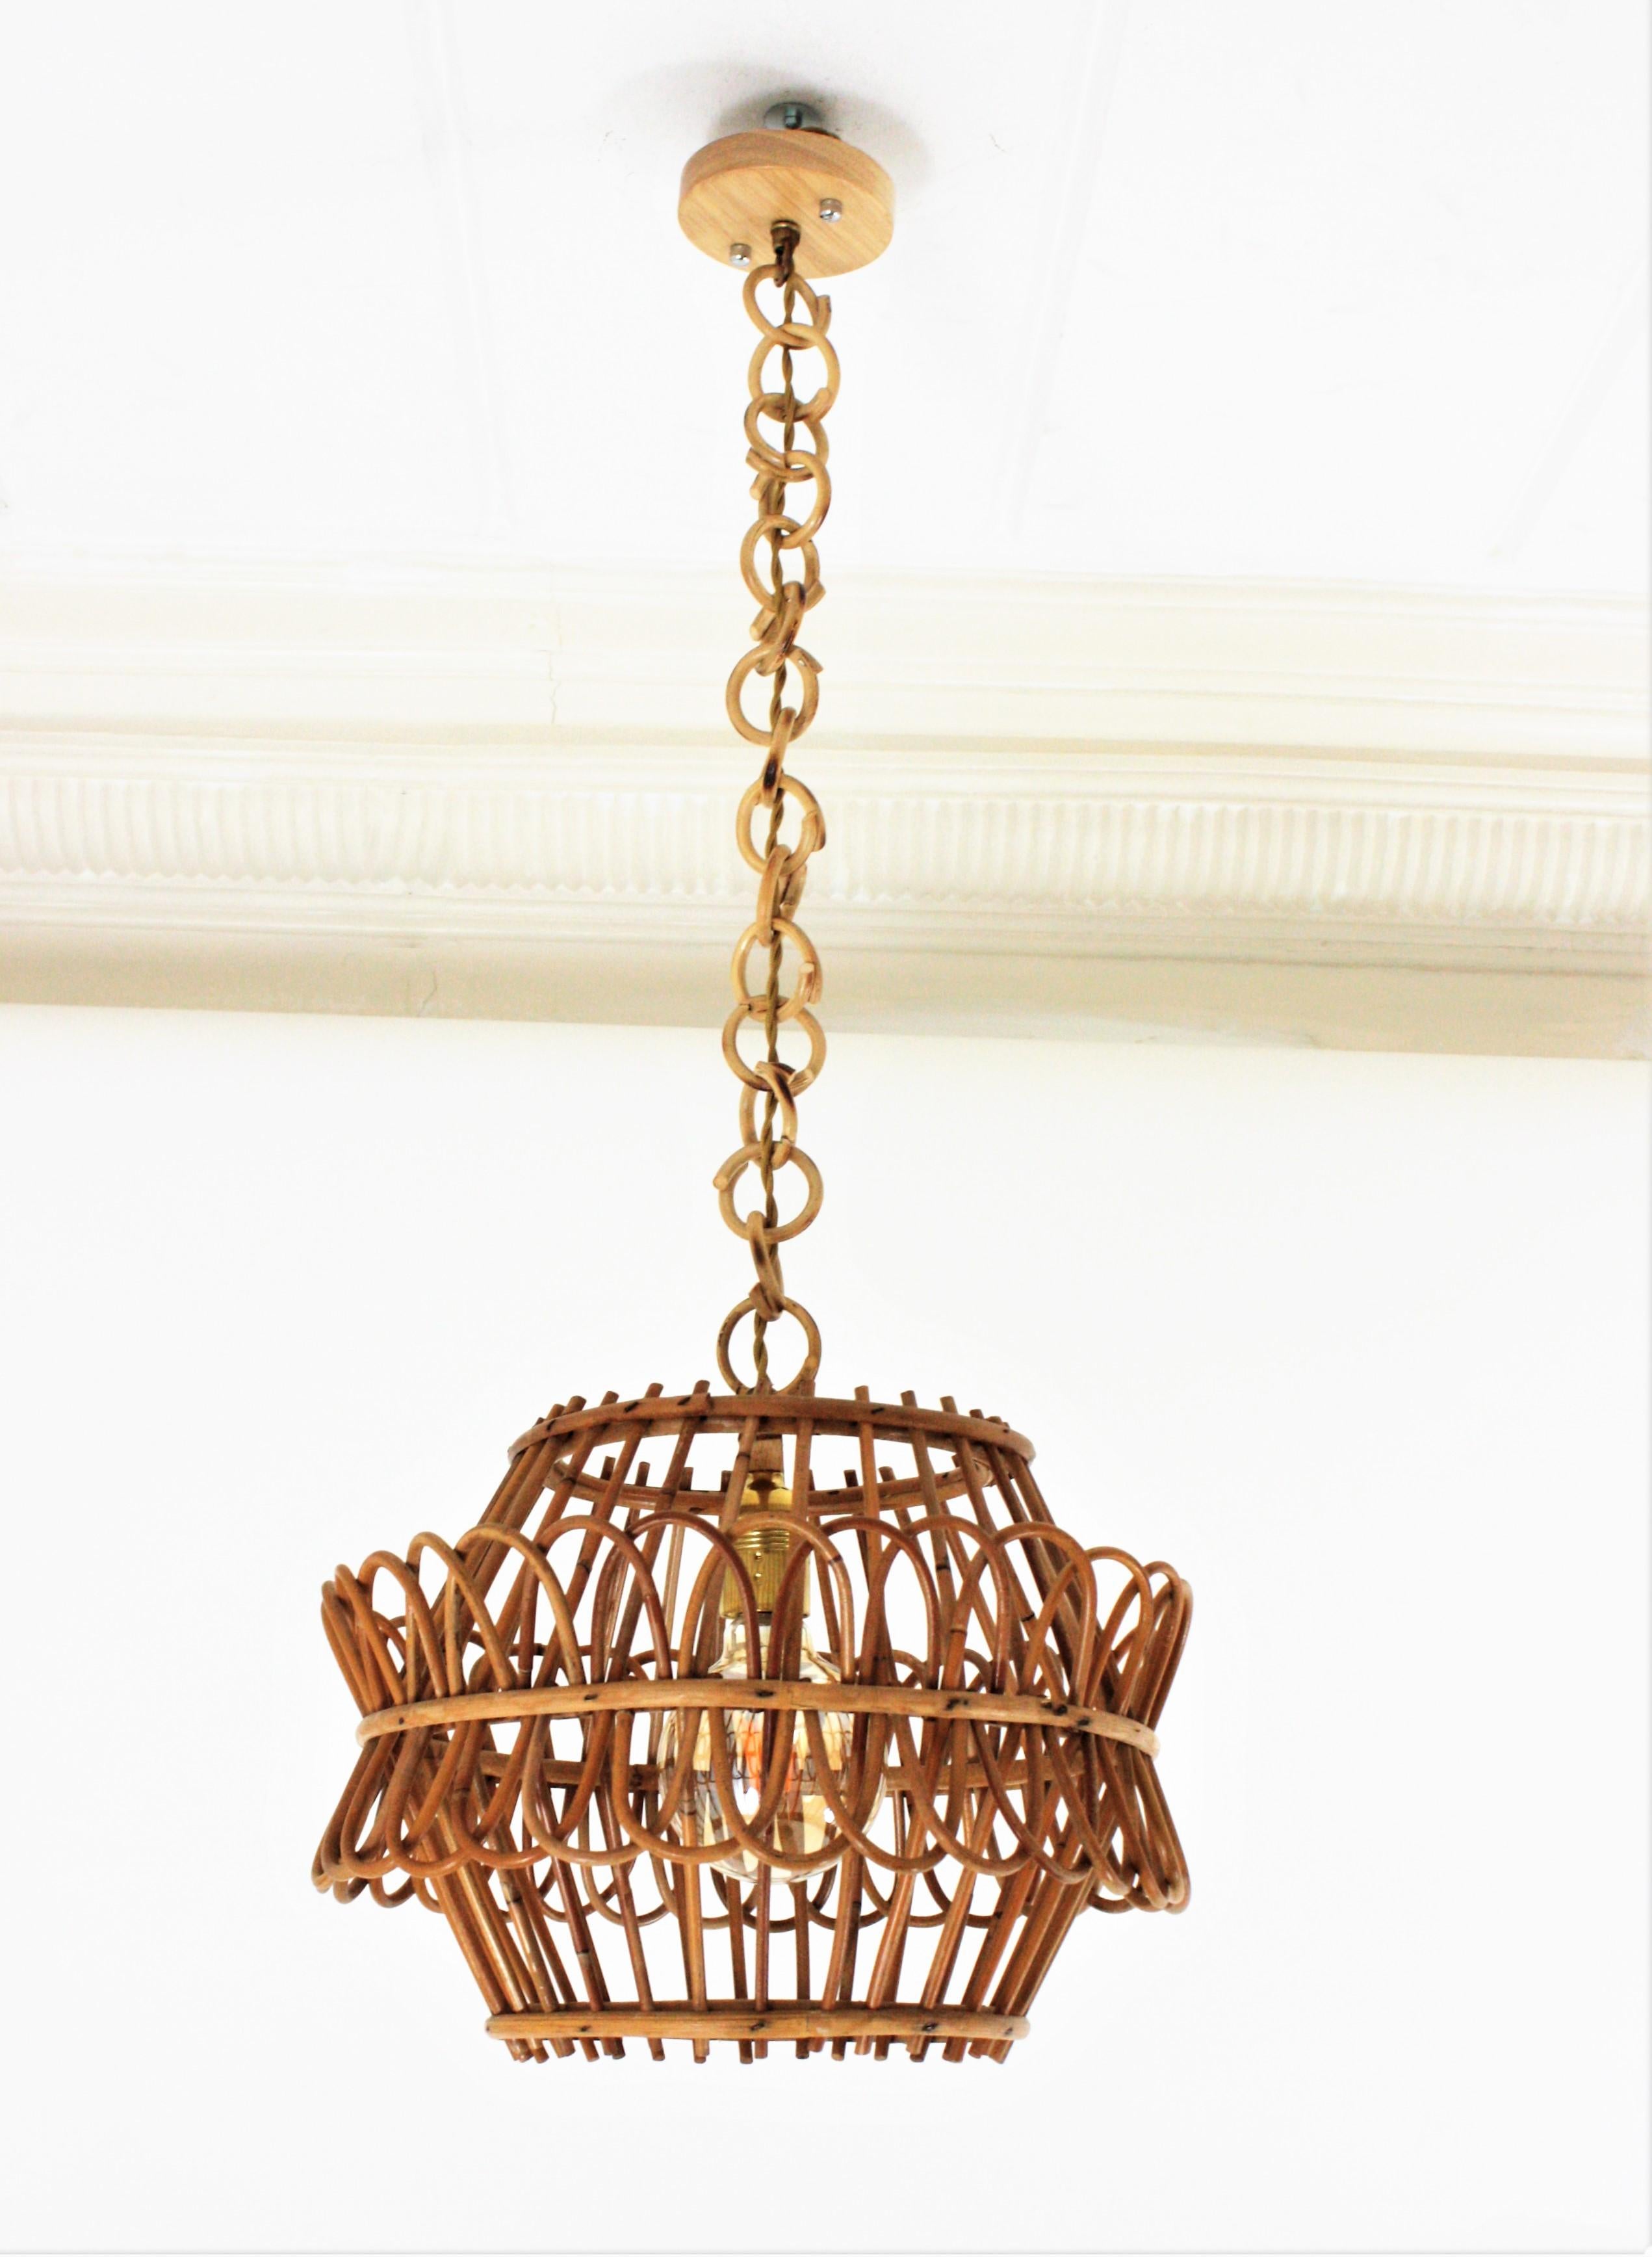 Bamboo French Pendant Light or Lantern in Rattan, 1950s For Sale